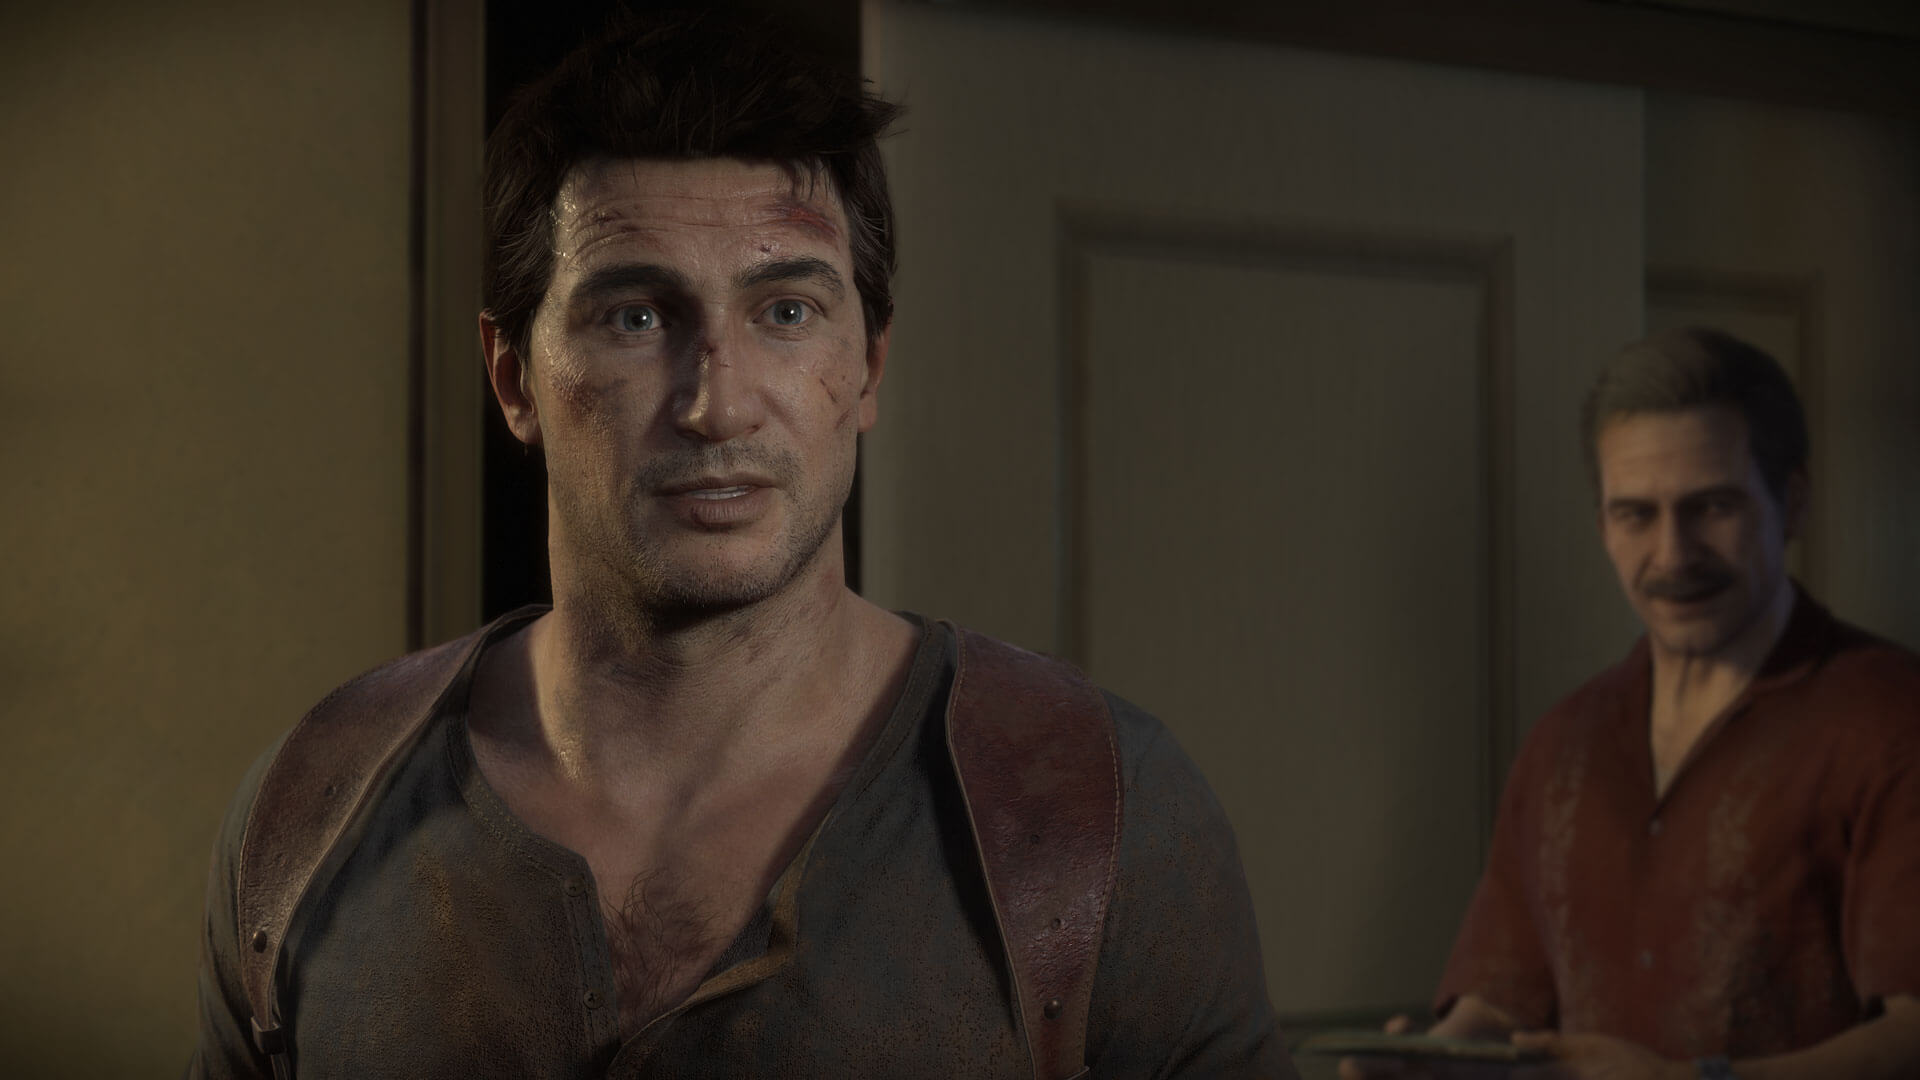 Young Nathan Drake #Uncharted 4: A Thief's End in 2023